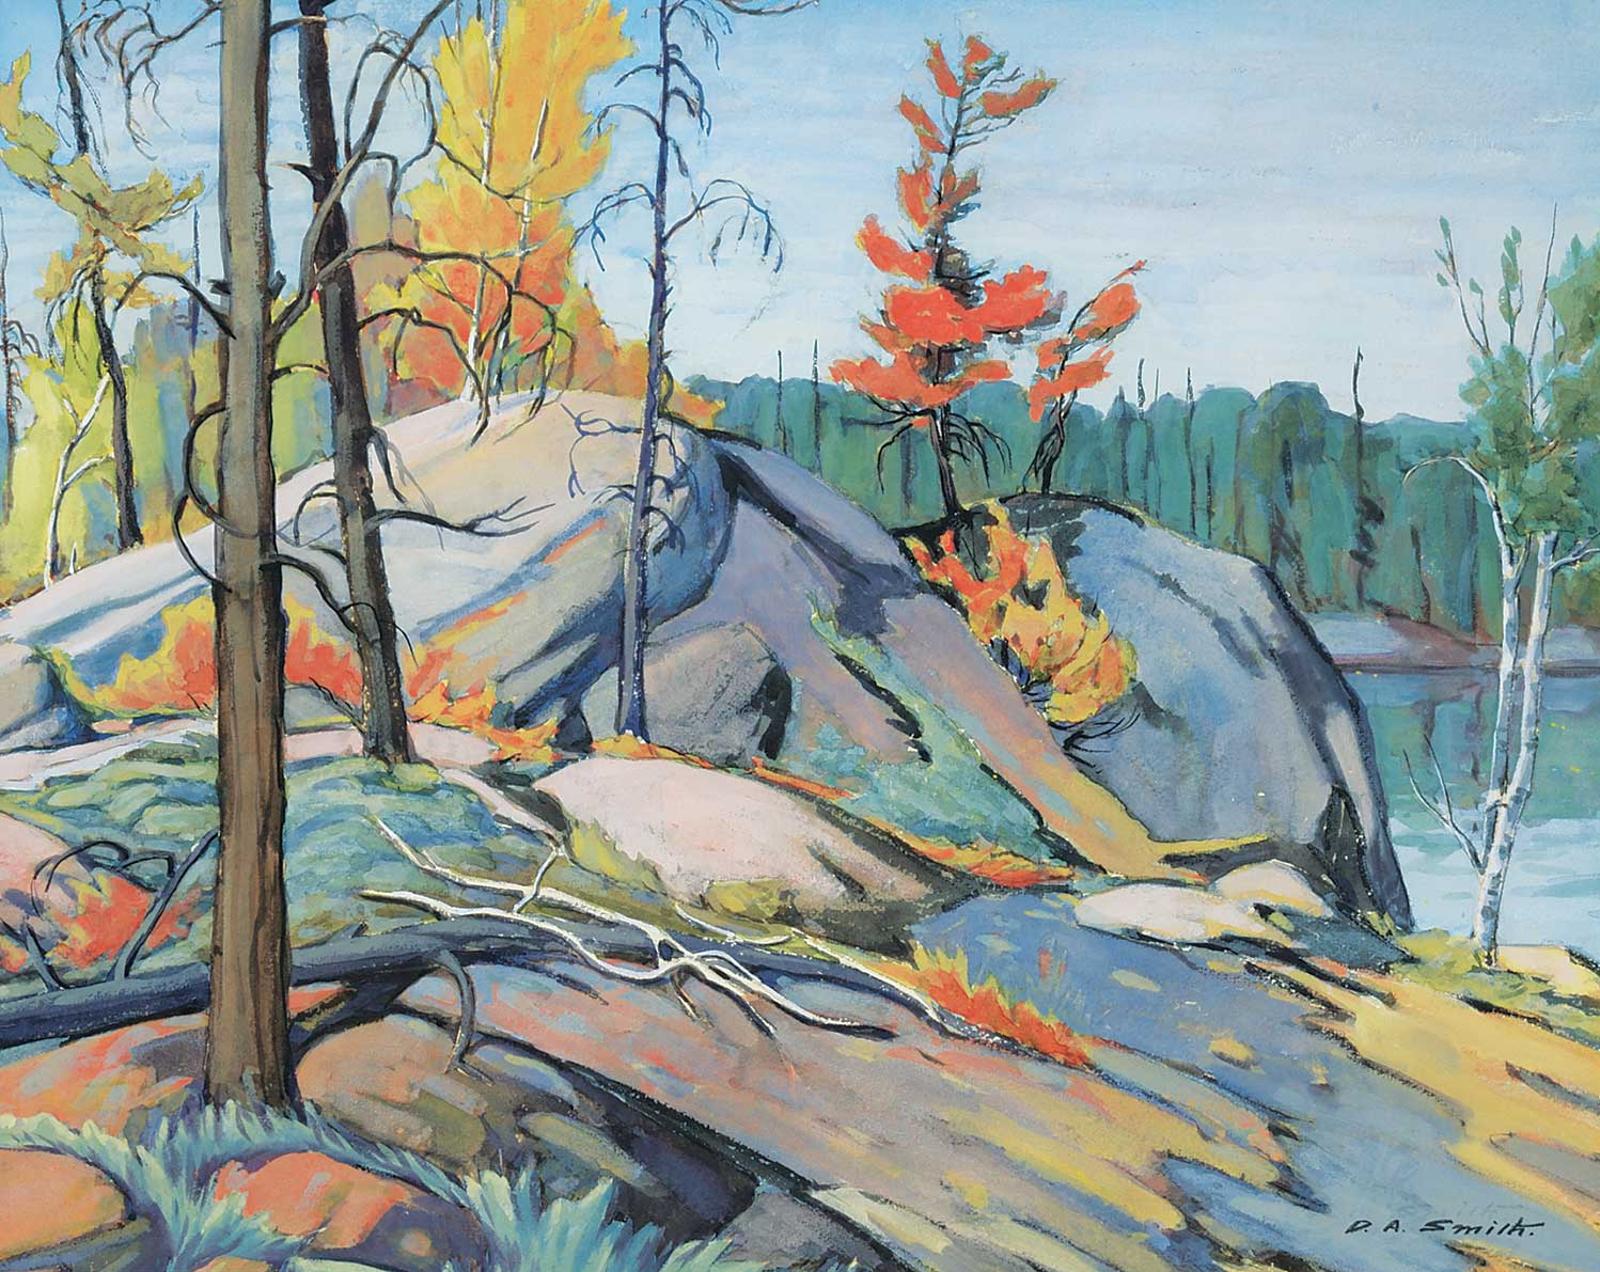 Donald Appelbee Smith (1917) - Untitled - Canadian Shield Country